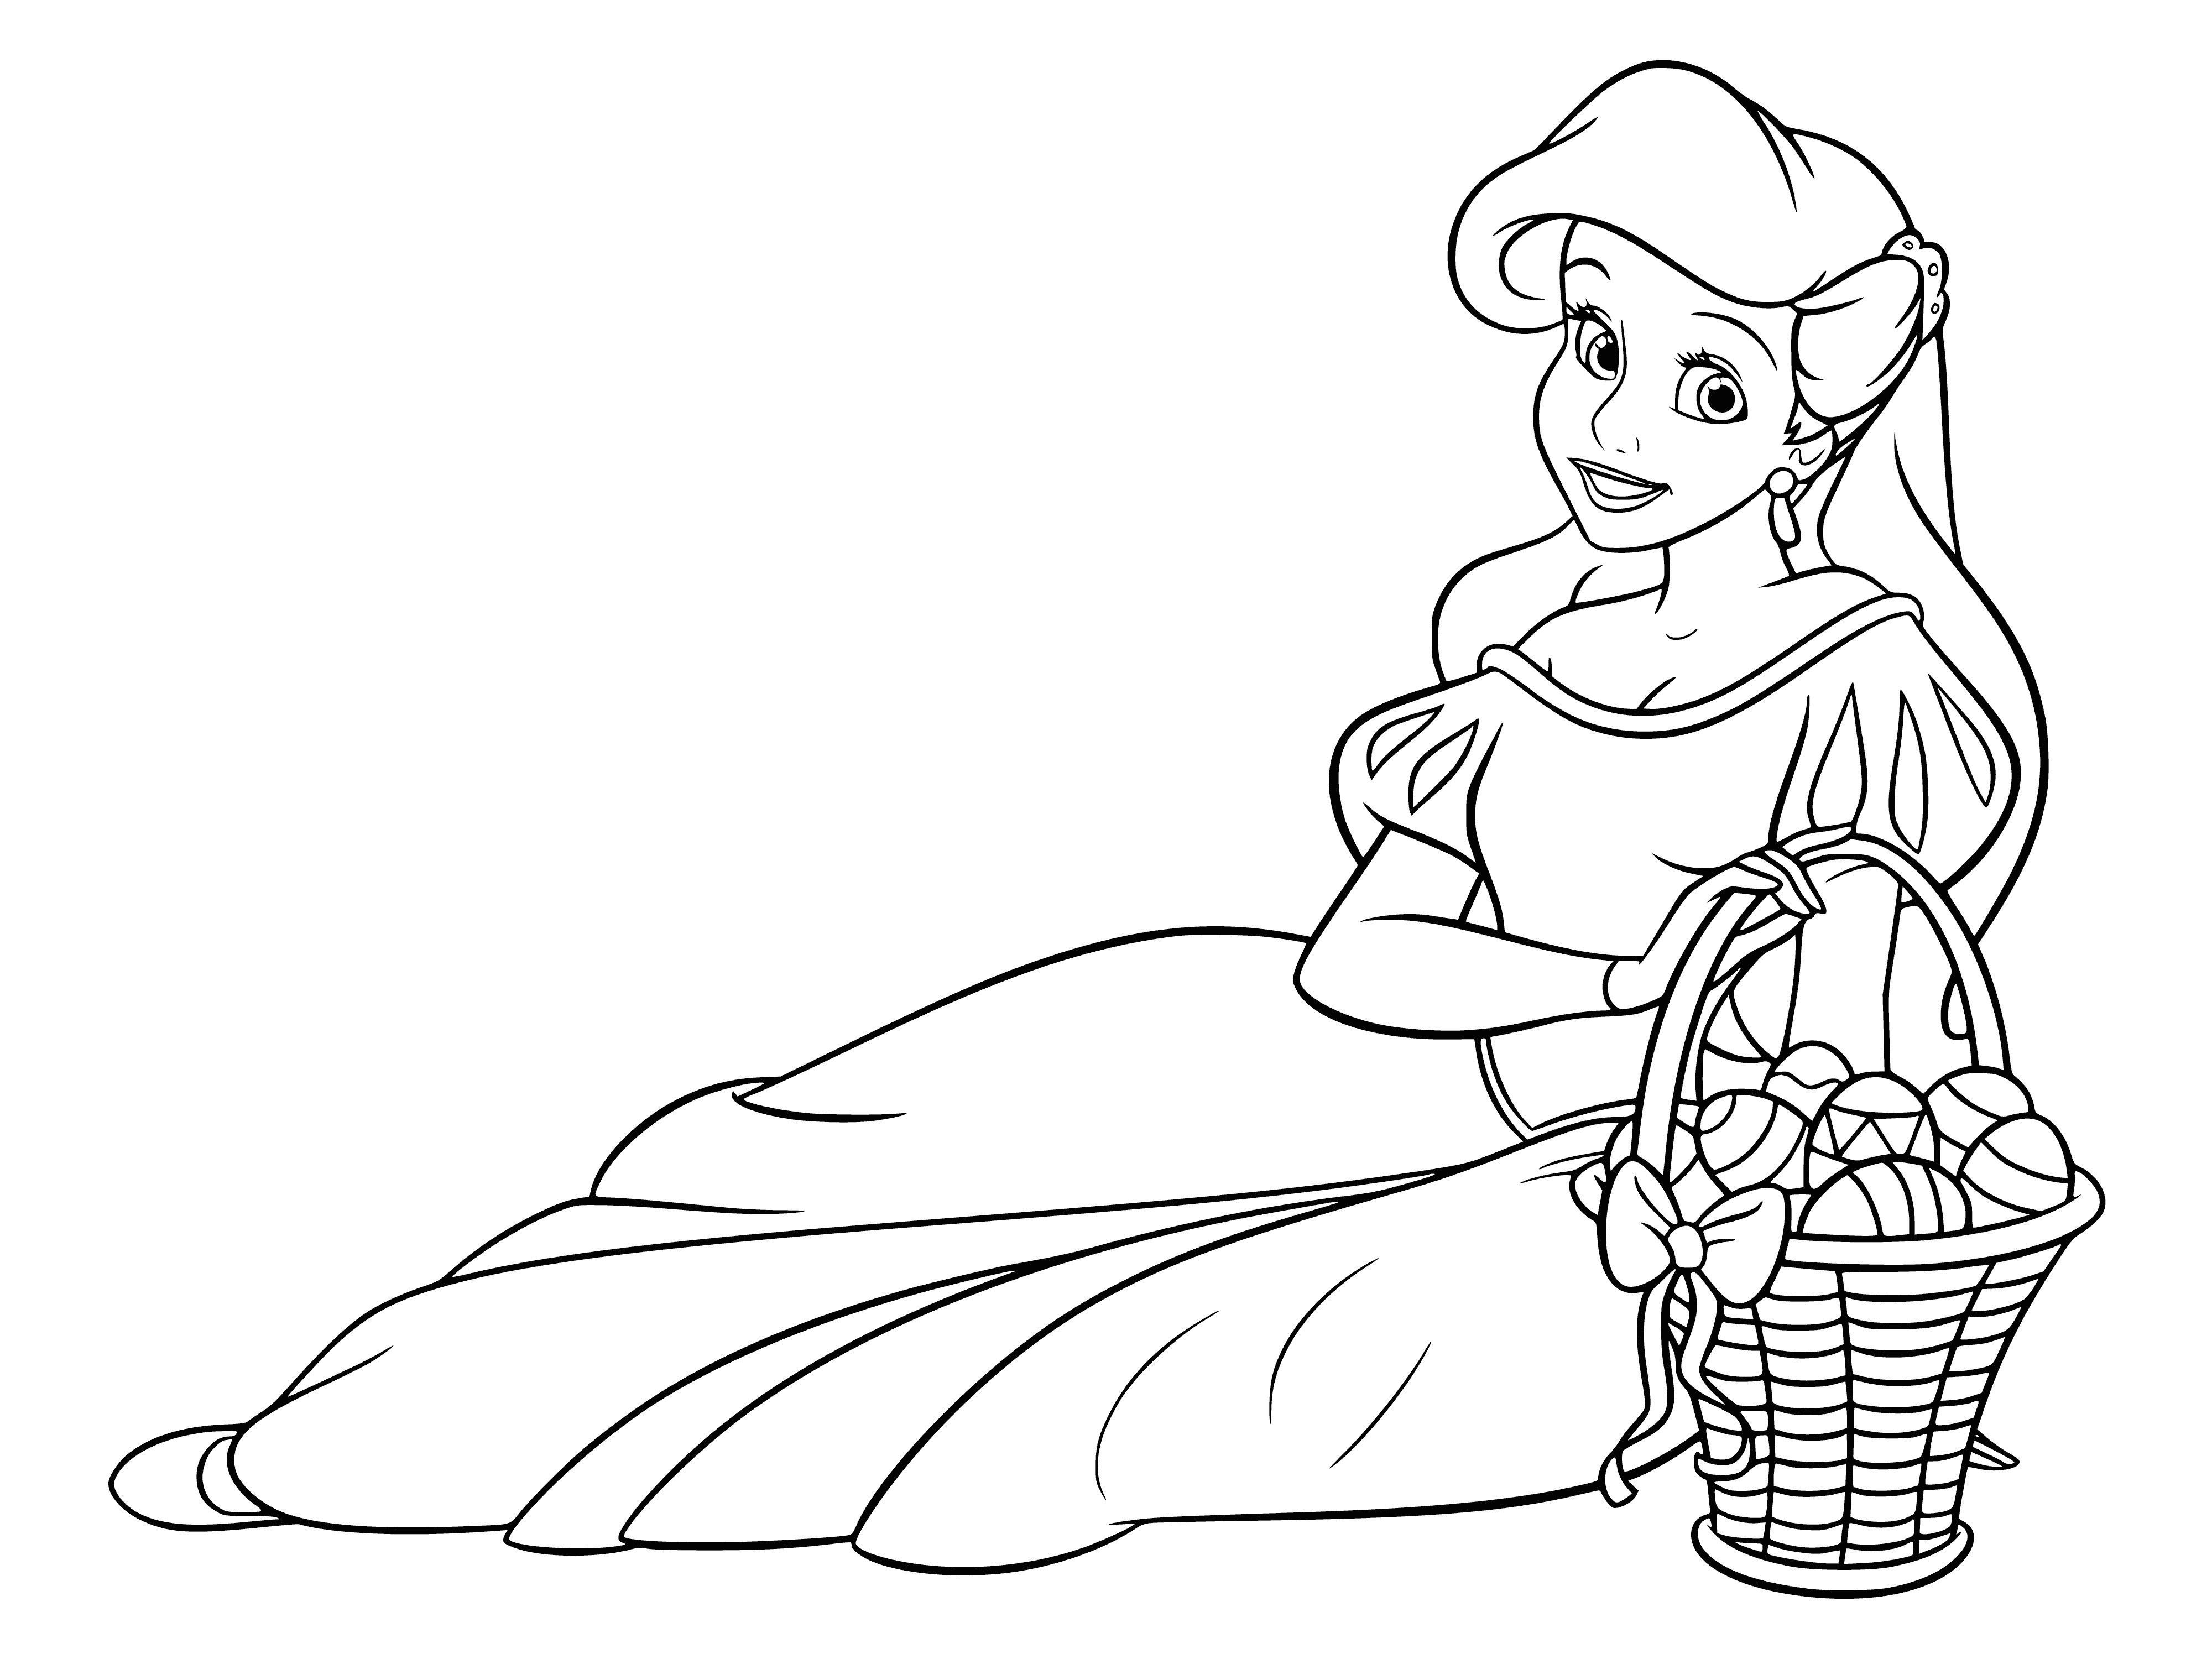 coloring page: Ariel is surrounded by spring flowers, bluebirds, & Easter eggs. Enjoying the sunny day, she sits on a log amidst the joy of the season.